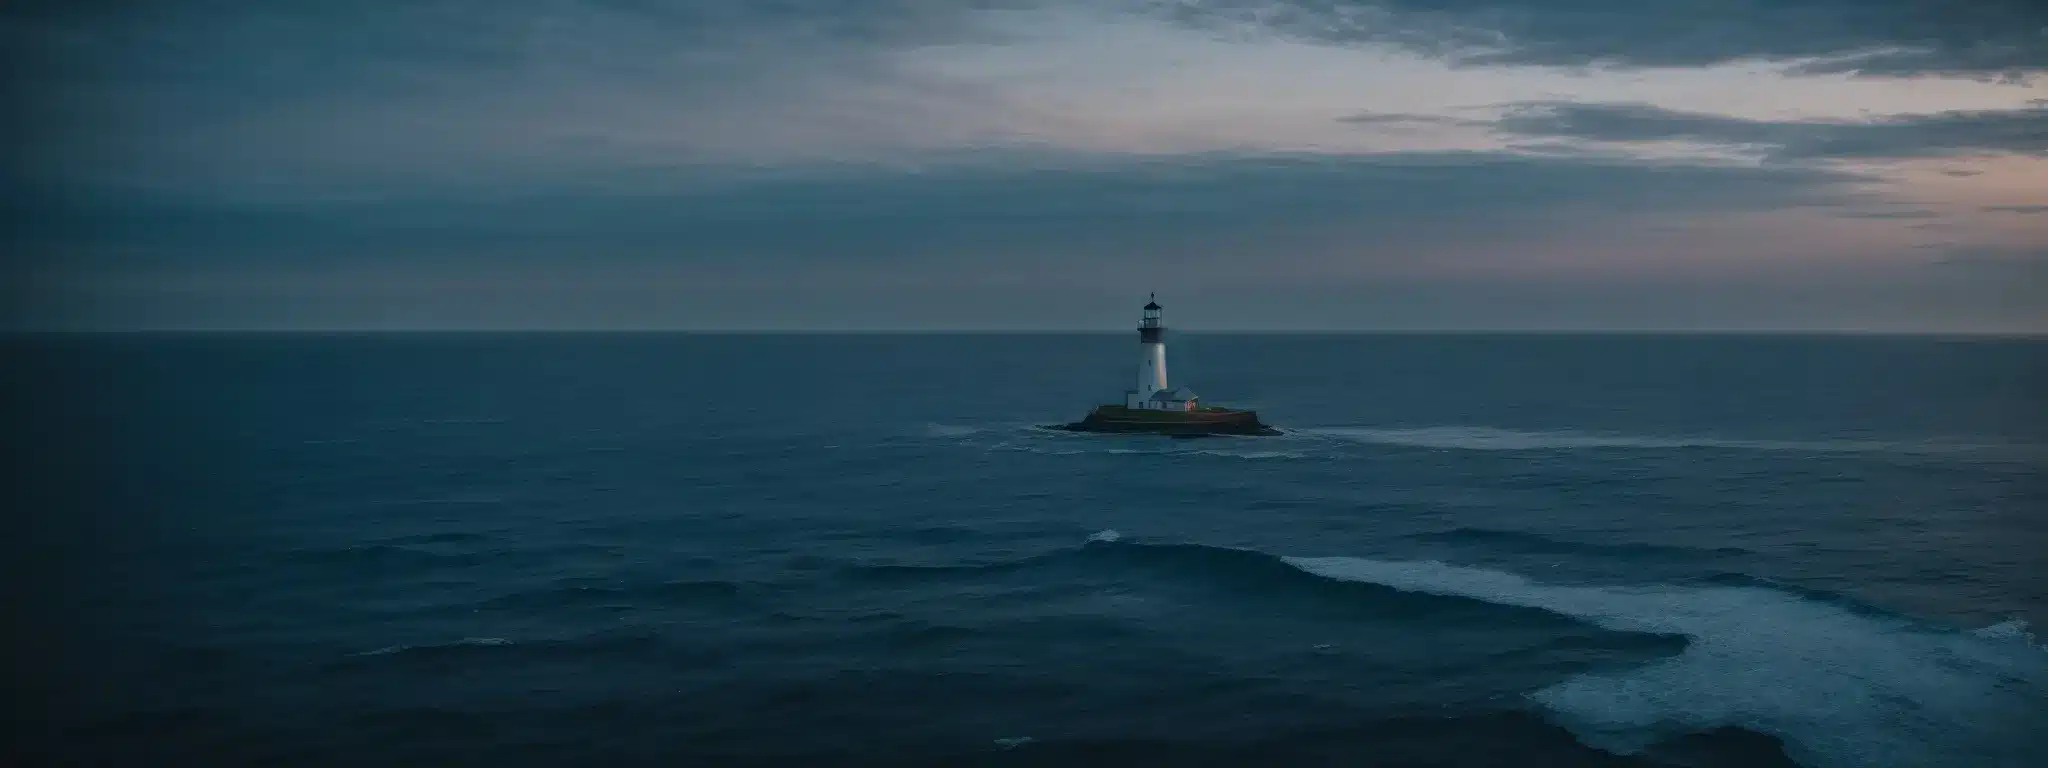 A Majestic Lighthouse Stands Alone, Casting A Unique, Unwavering Light Over The Vast Expanse Of The Ocean At Dusk.